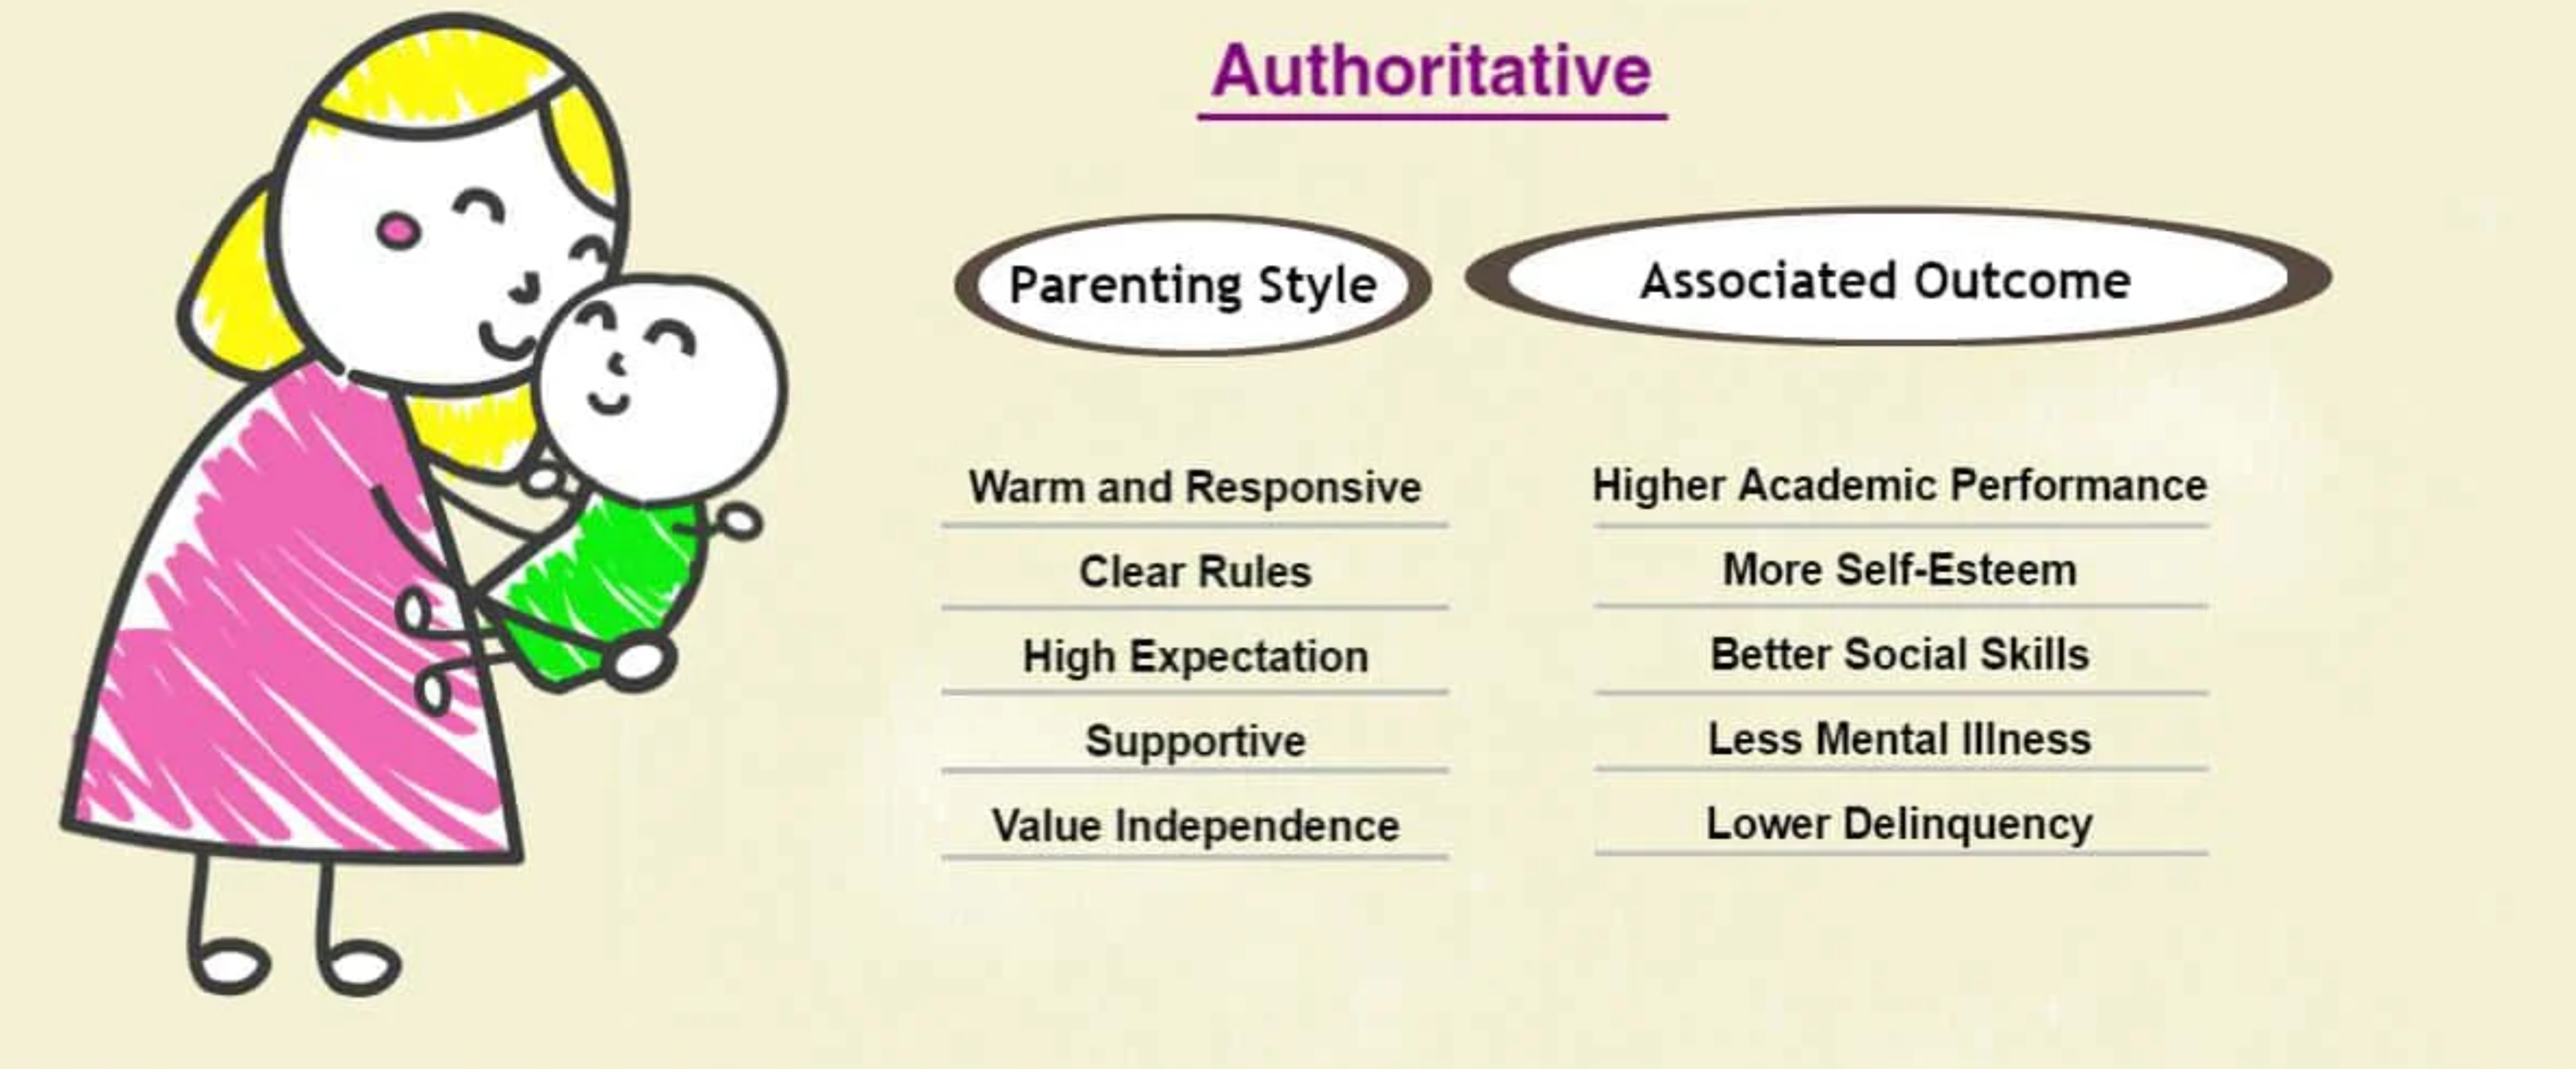 importance of parenting styles